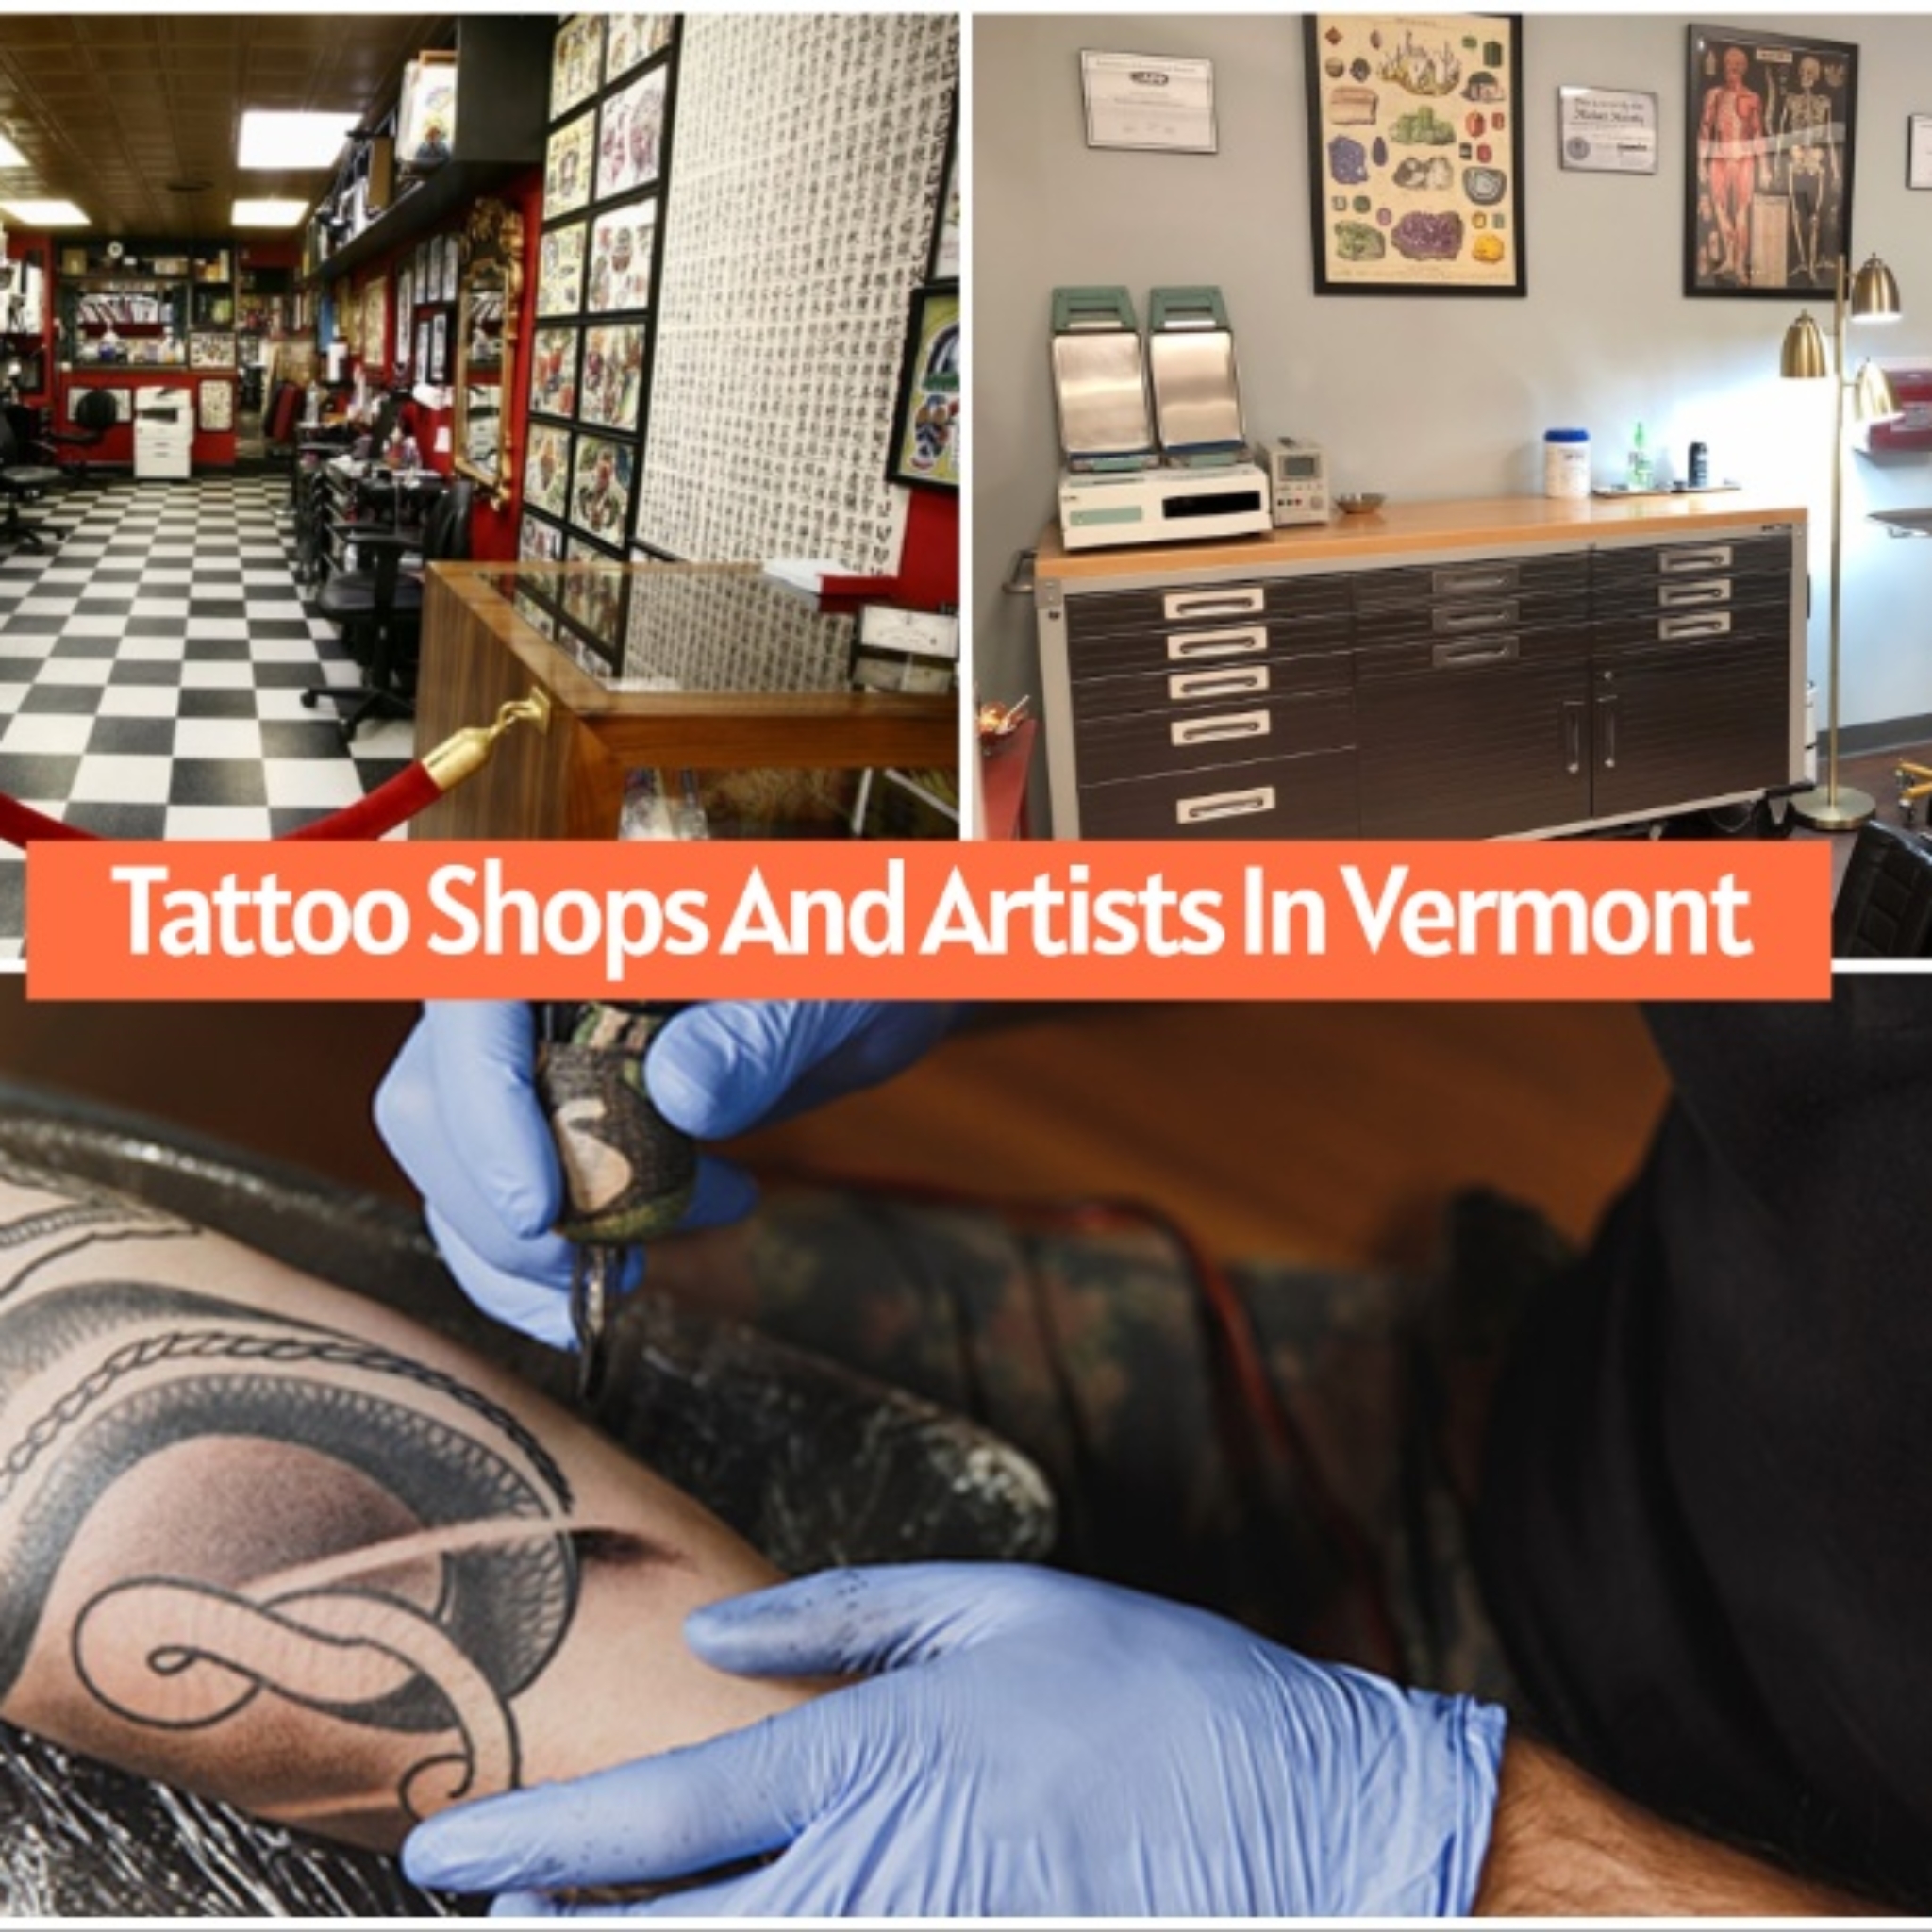 Tattoo Shops And Artists In Vermont